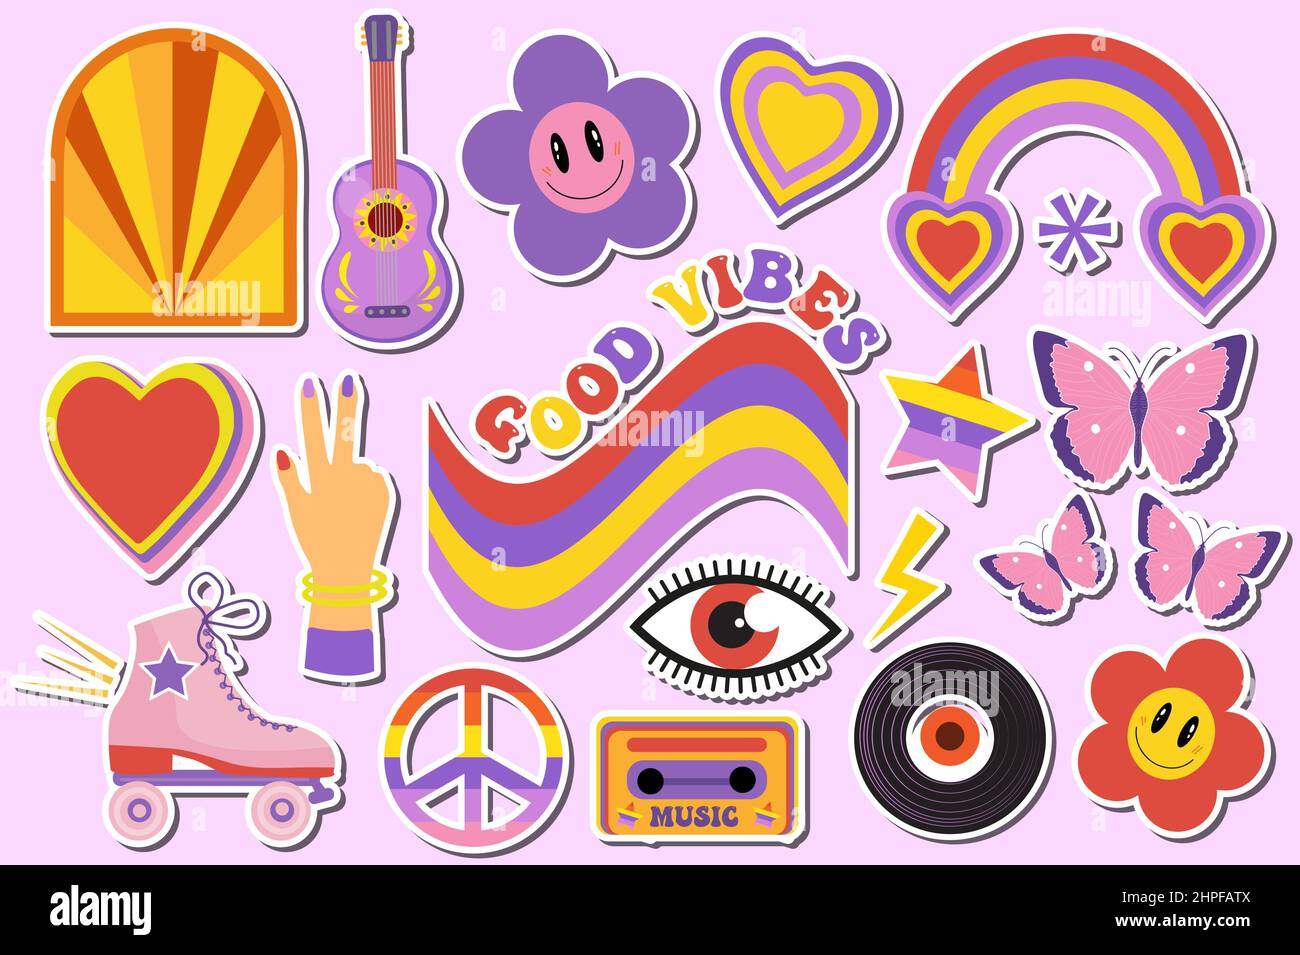 Retro 70s Hippie Sticker Objects Set Psychedelic Trippy Groovy Elements For T Shirts Cartoon 